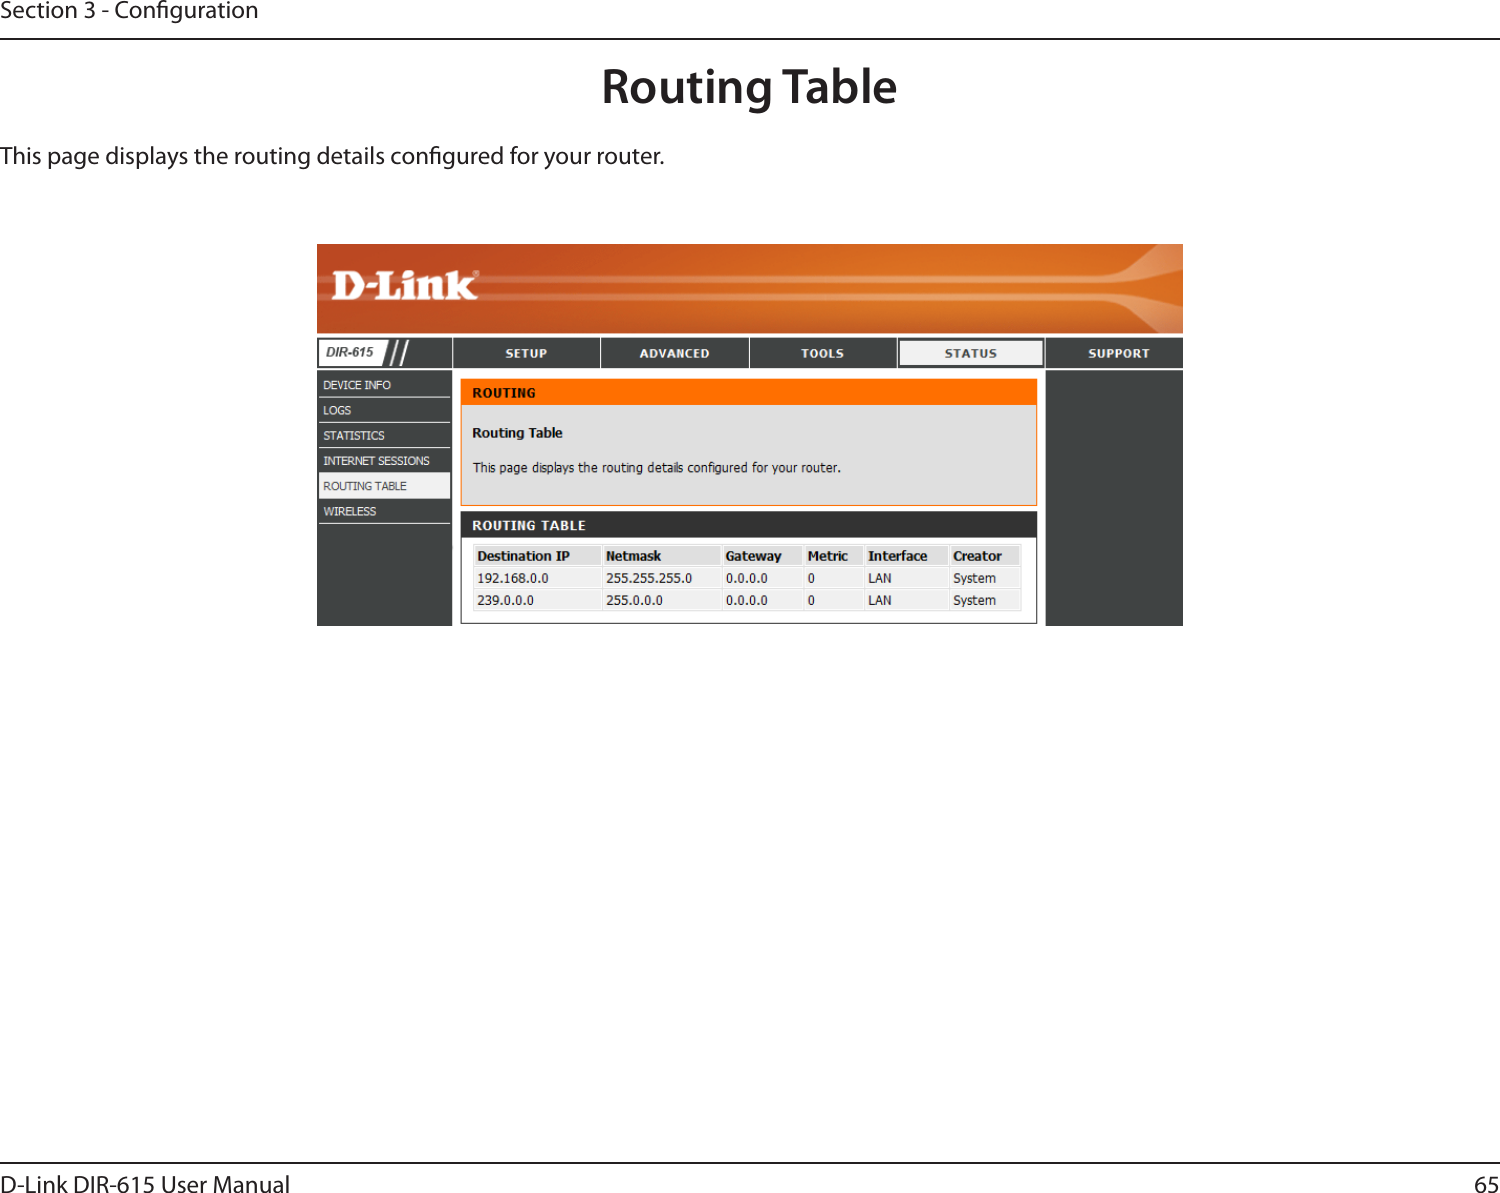 65D-Link DIR-615 User ManualSection 3 - CongurationRouting TableThis page displays the routing details congured for your router.